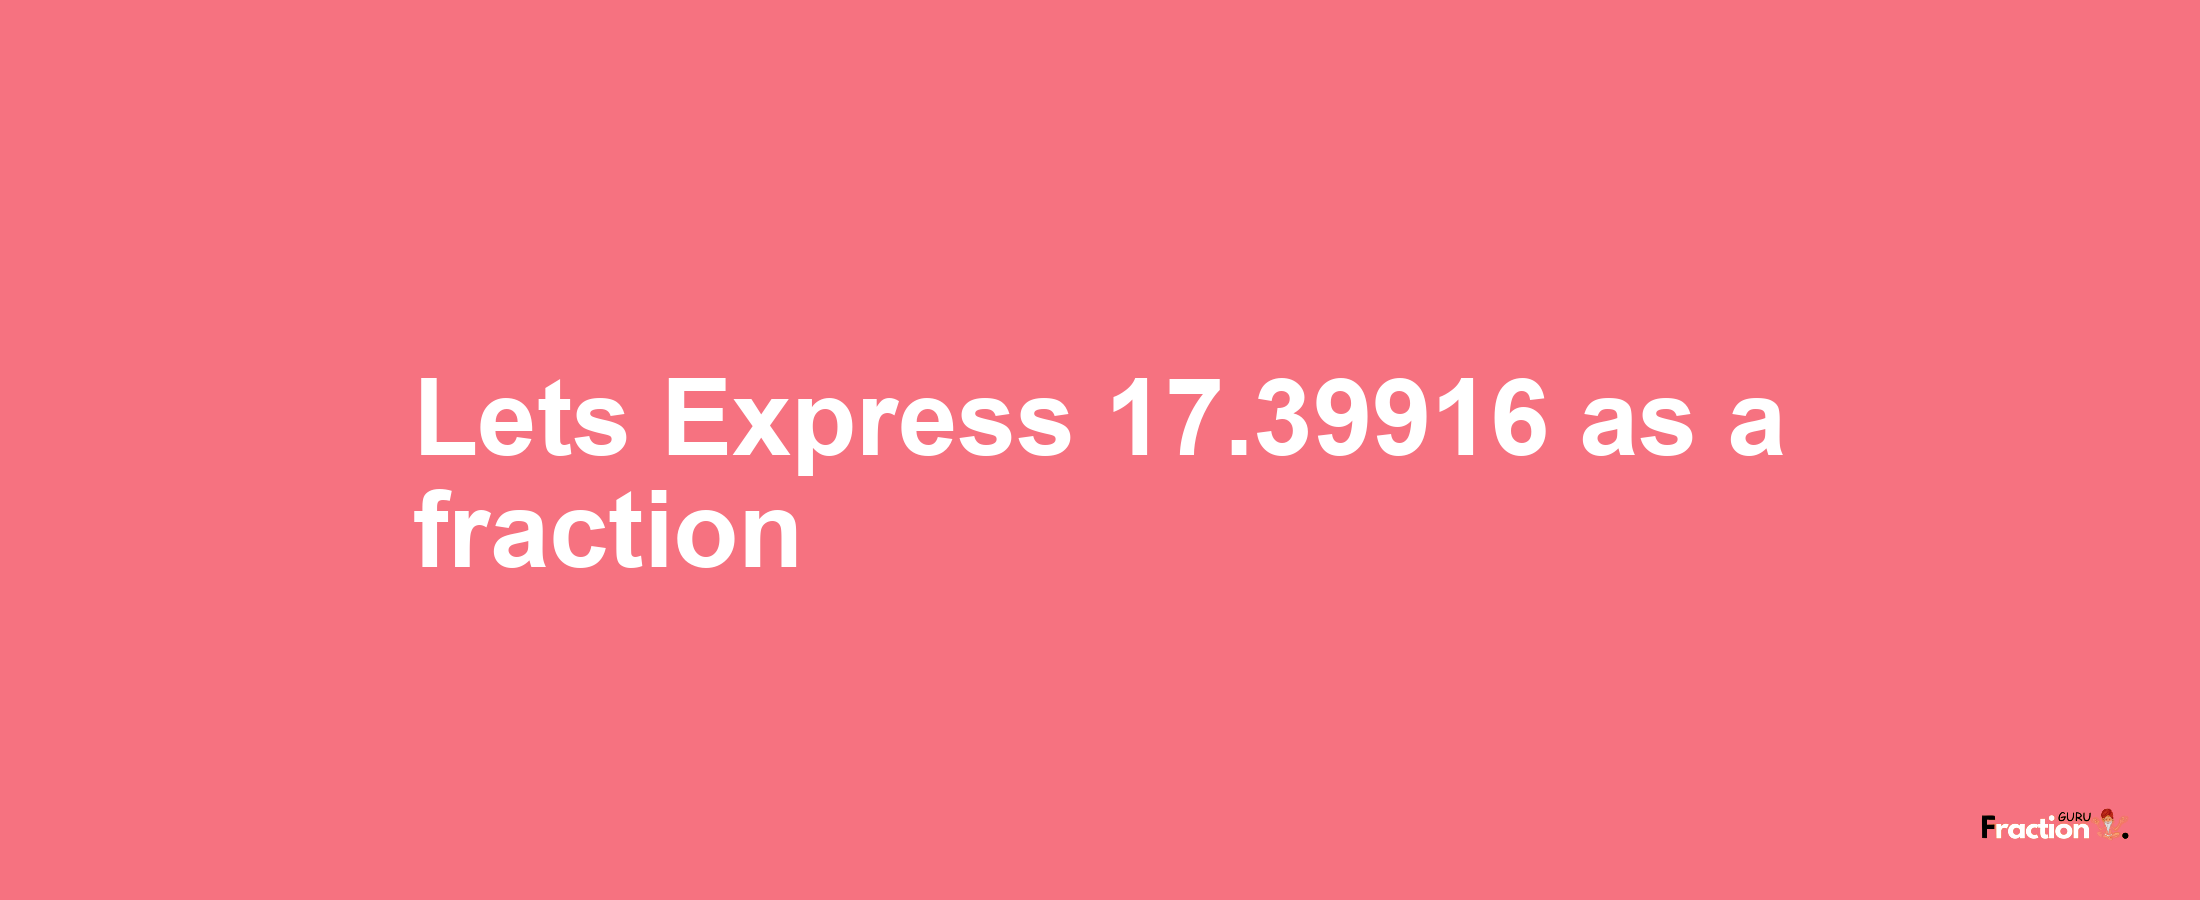 Lets Express 17.39916 as afraction